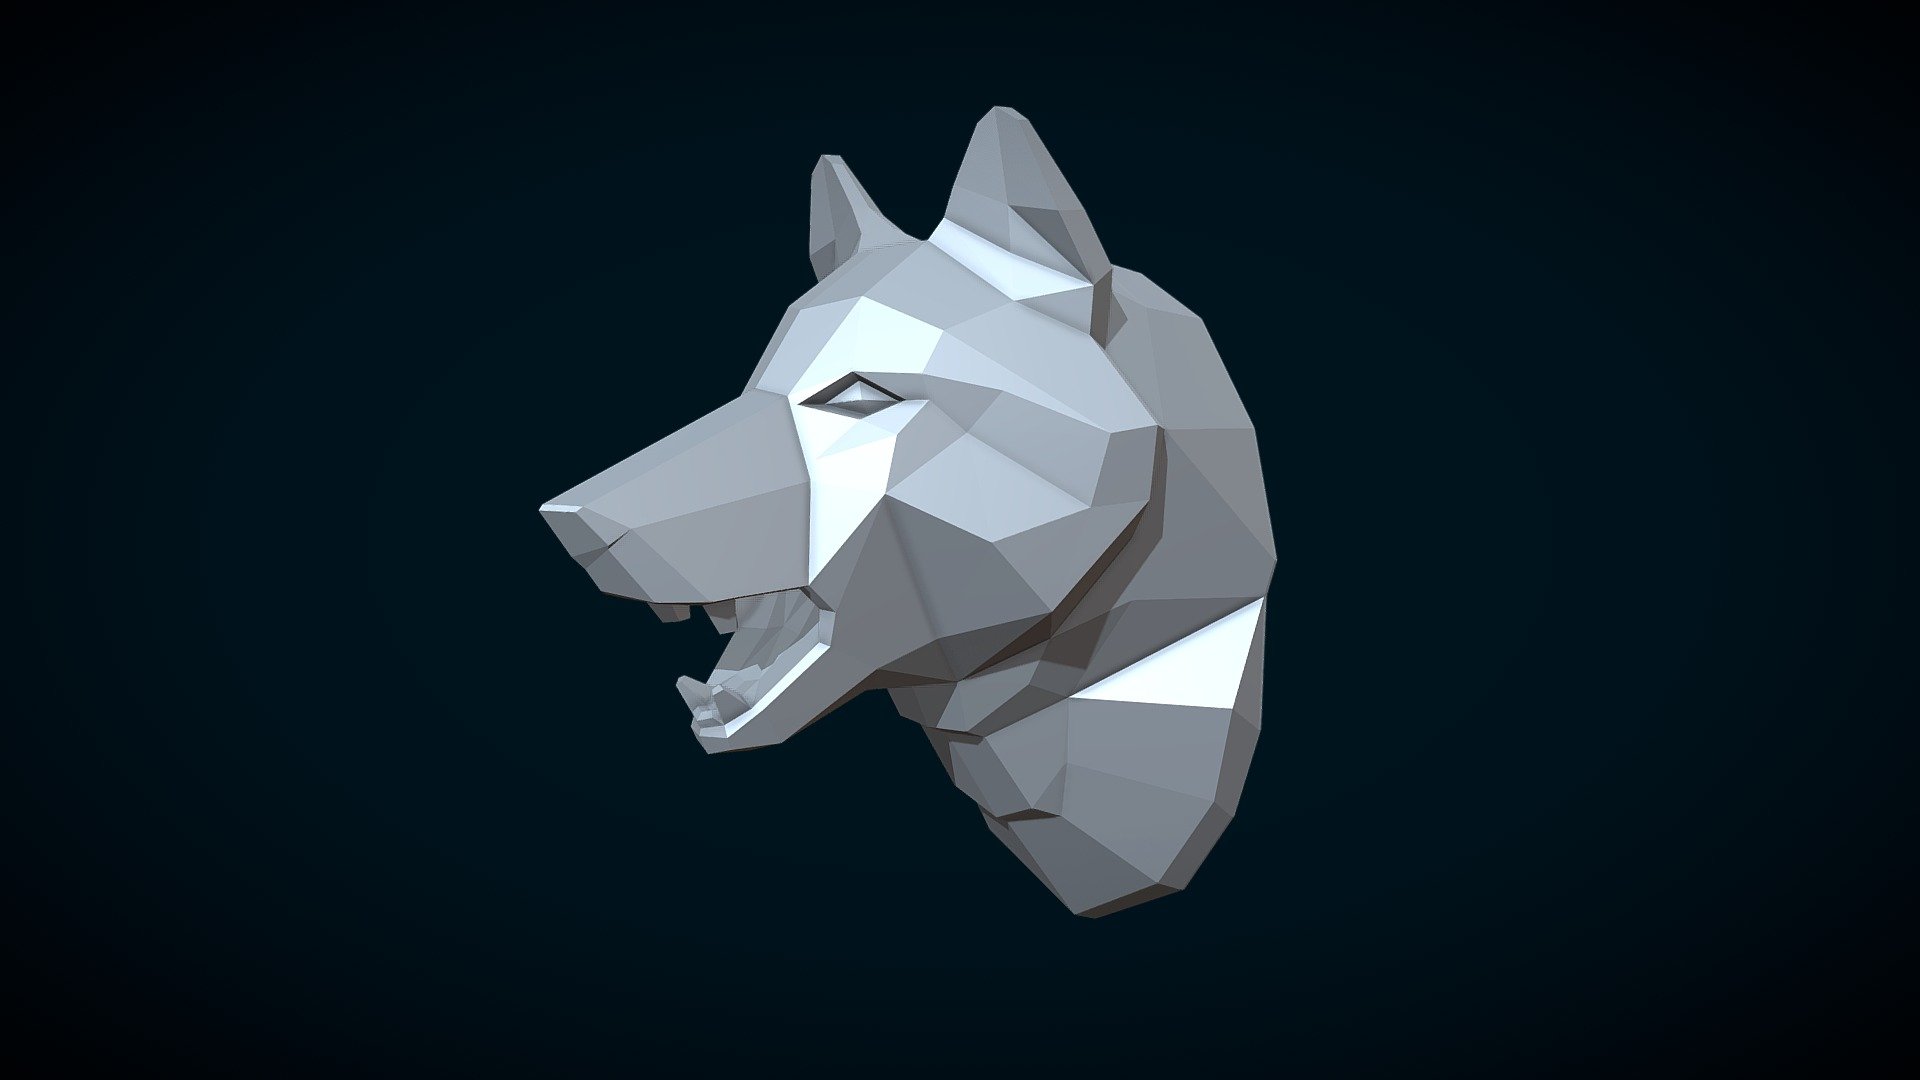 Print ready Wolf Head.

Measure units are millimeters, the model is about 1 cm in width.

Mesh is manifold, no holes, no inverted faces, no bad contiguous edges.

Available formats: .blend, .stl, .obj, .fbx, .dae

Here is two versions of the model:

1) Wlfhd_sld. (.blend, .stl, .obj, .fbx, .dae) Solid(one piece) model. 608 triangular faces.

3) Wlfhd_hlw. (.blend, .stl, .obj, .fbx, .dae) Hollow model. 10432 triangular faces 3d model